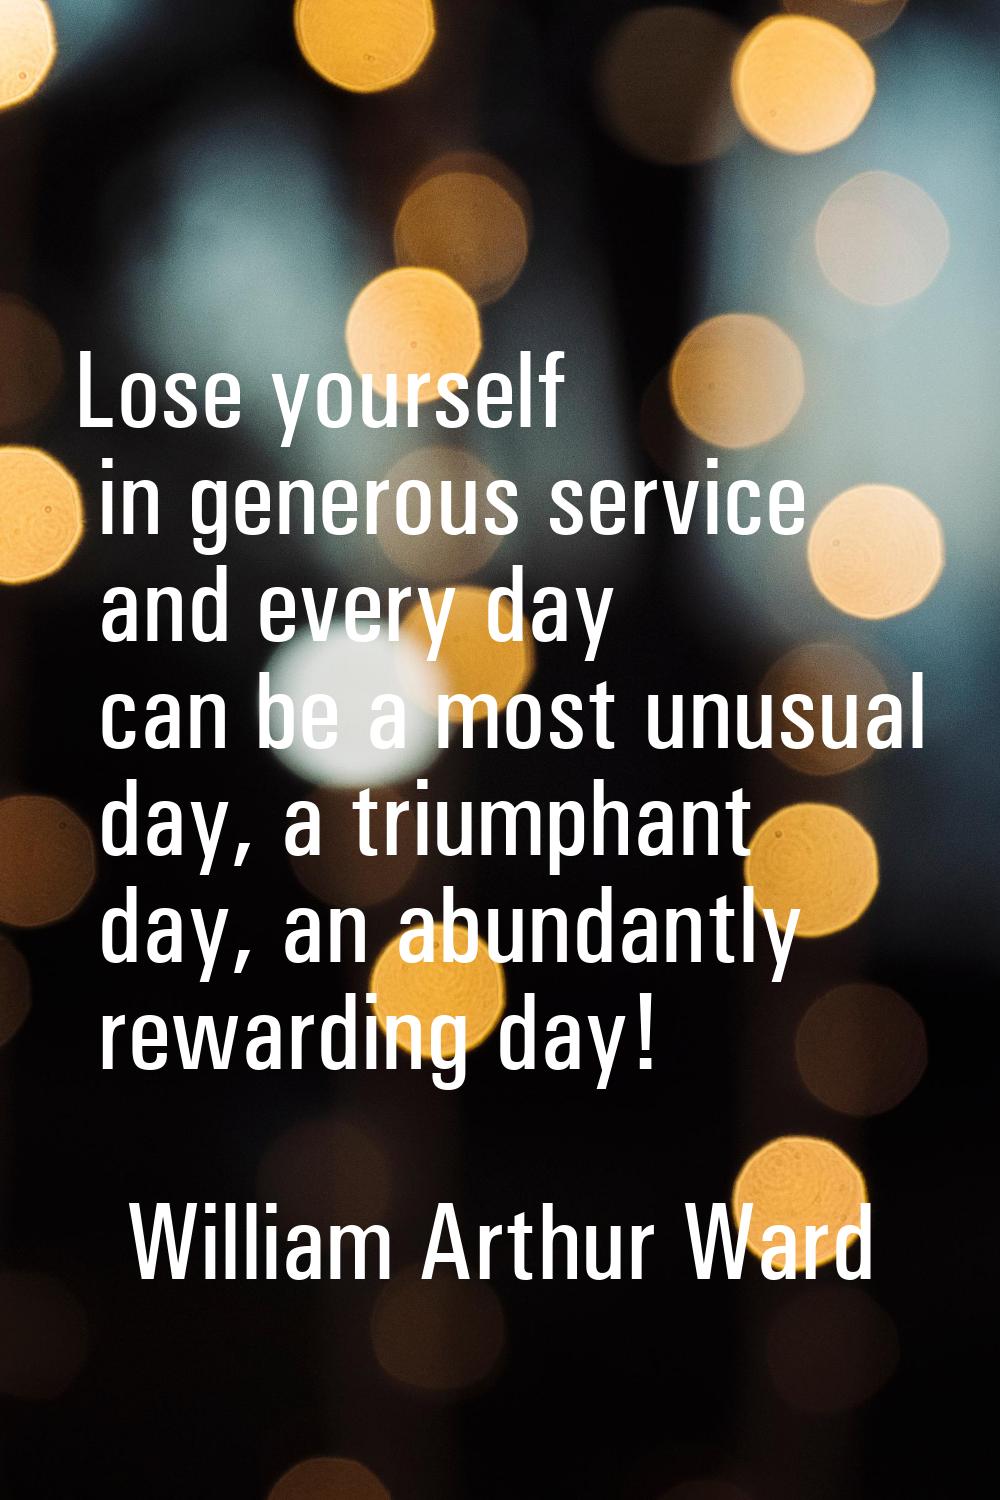 Lose yourself in generous service and every day can be a most unusual day, a triumphant day, an abu